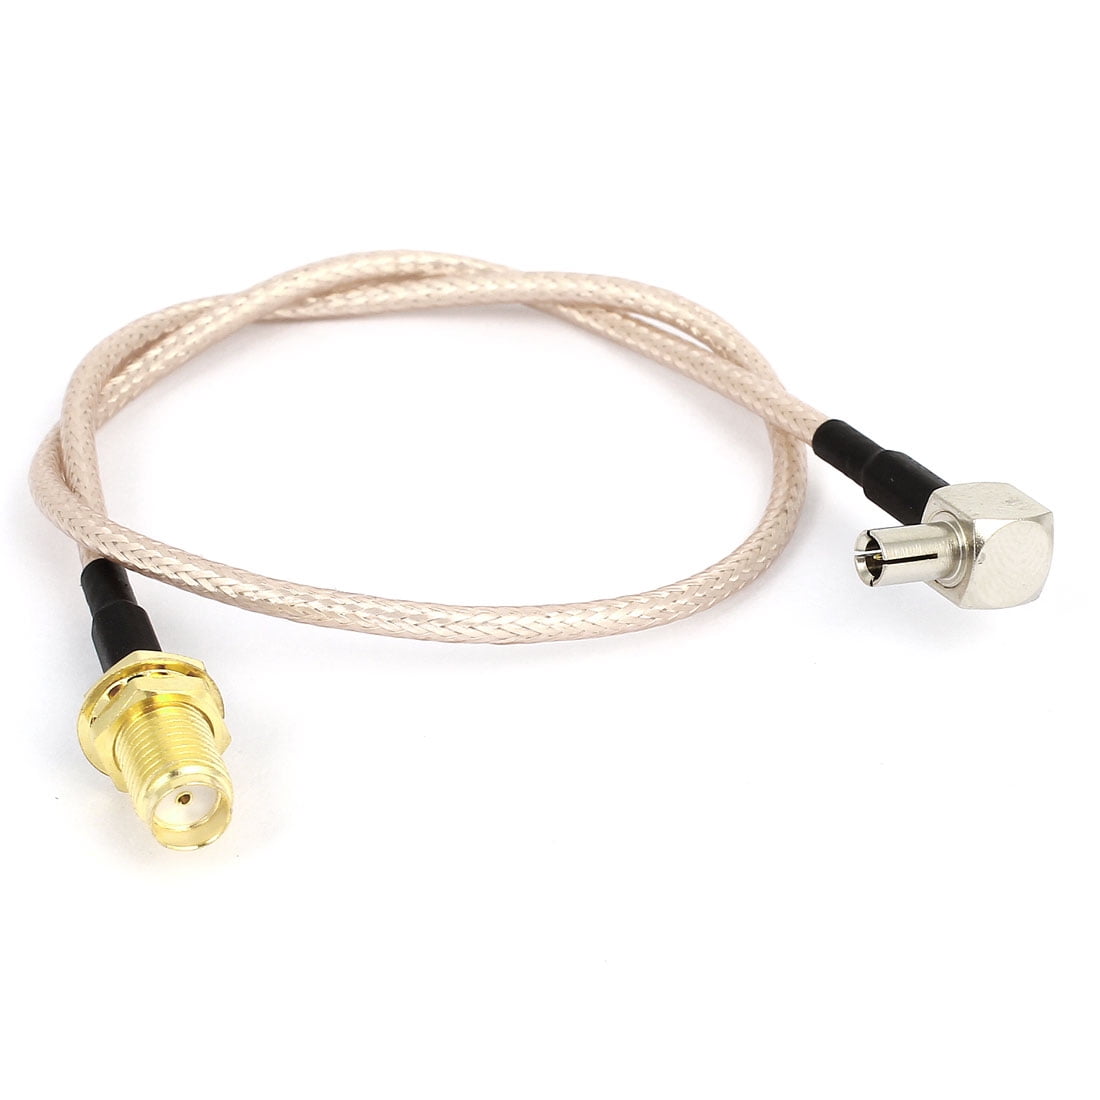 USA-CA RG316 SMB MALE to TNC FEMALE BULKHEAD Coaxial RF Pigtail Cable 